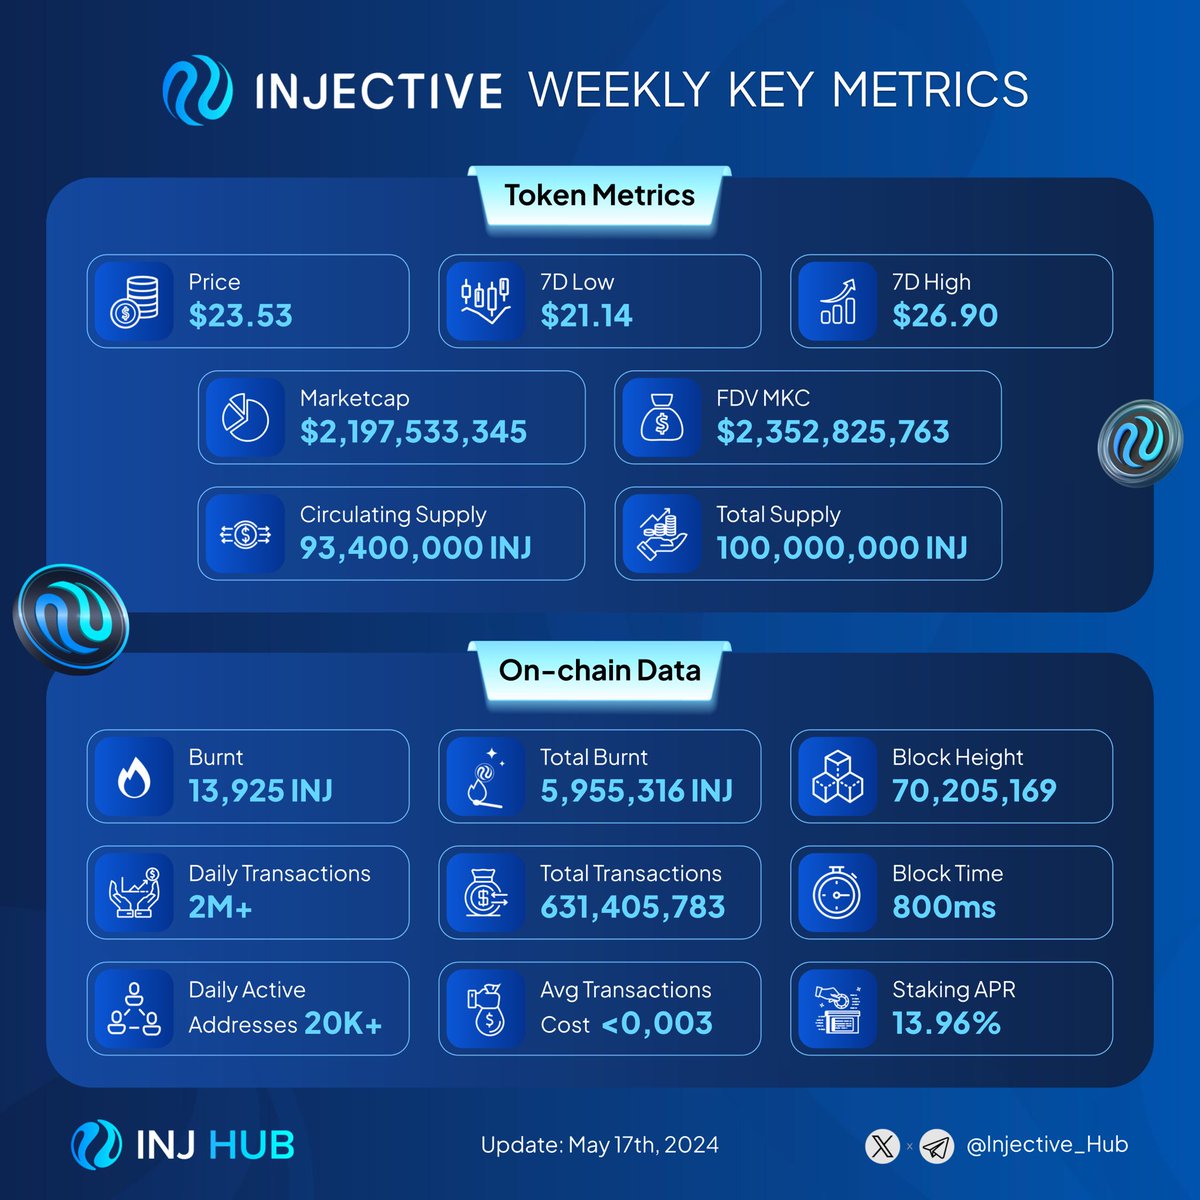 🧐 Injective On-chain Key Metrics in a infographic:

- Daily Transactions: The number remains steady at over 2 million. 
- Staking APR: The annual percentage rate for staking fluctuates around 13.96%
- On chain transactions reached the number of 631M+🔥
 - 13,925 $INJ was burnt